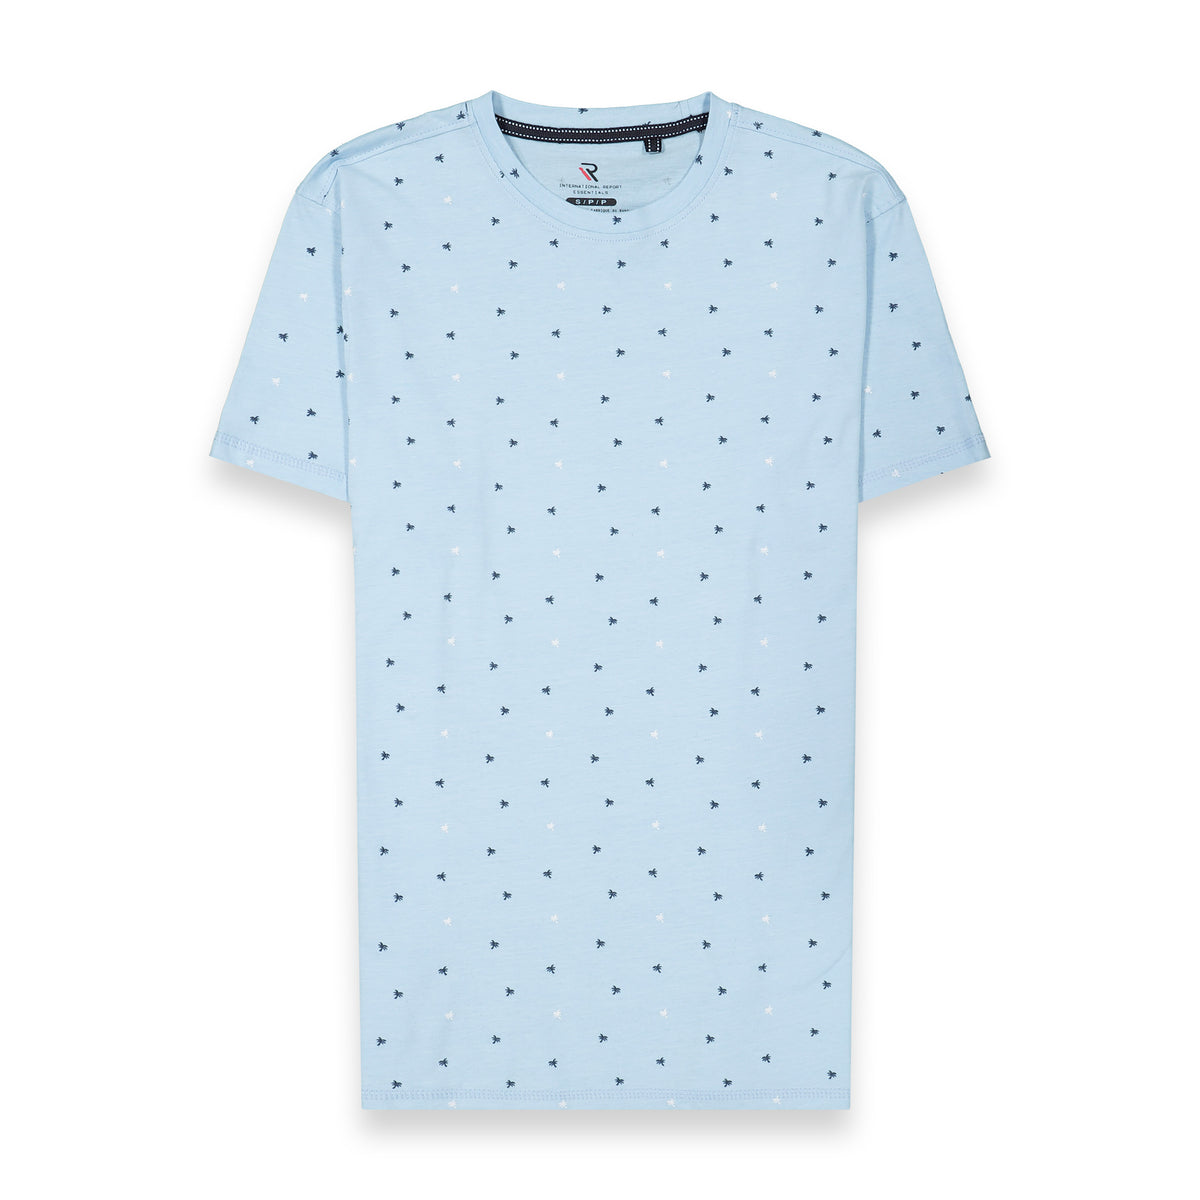 Front View of Short Sleeve Shirt with Palm Tree Print in Blue